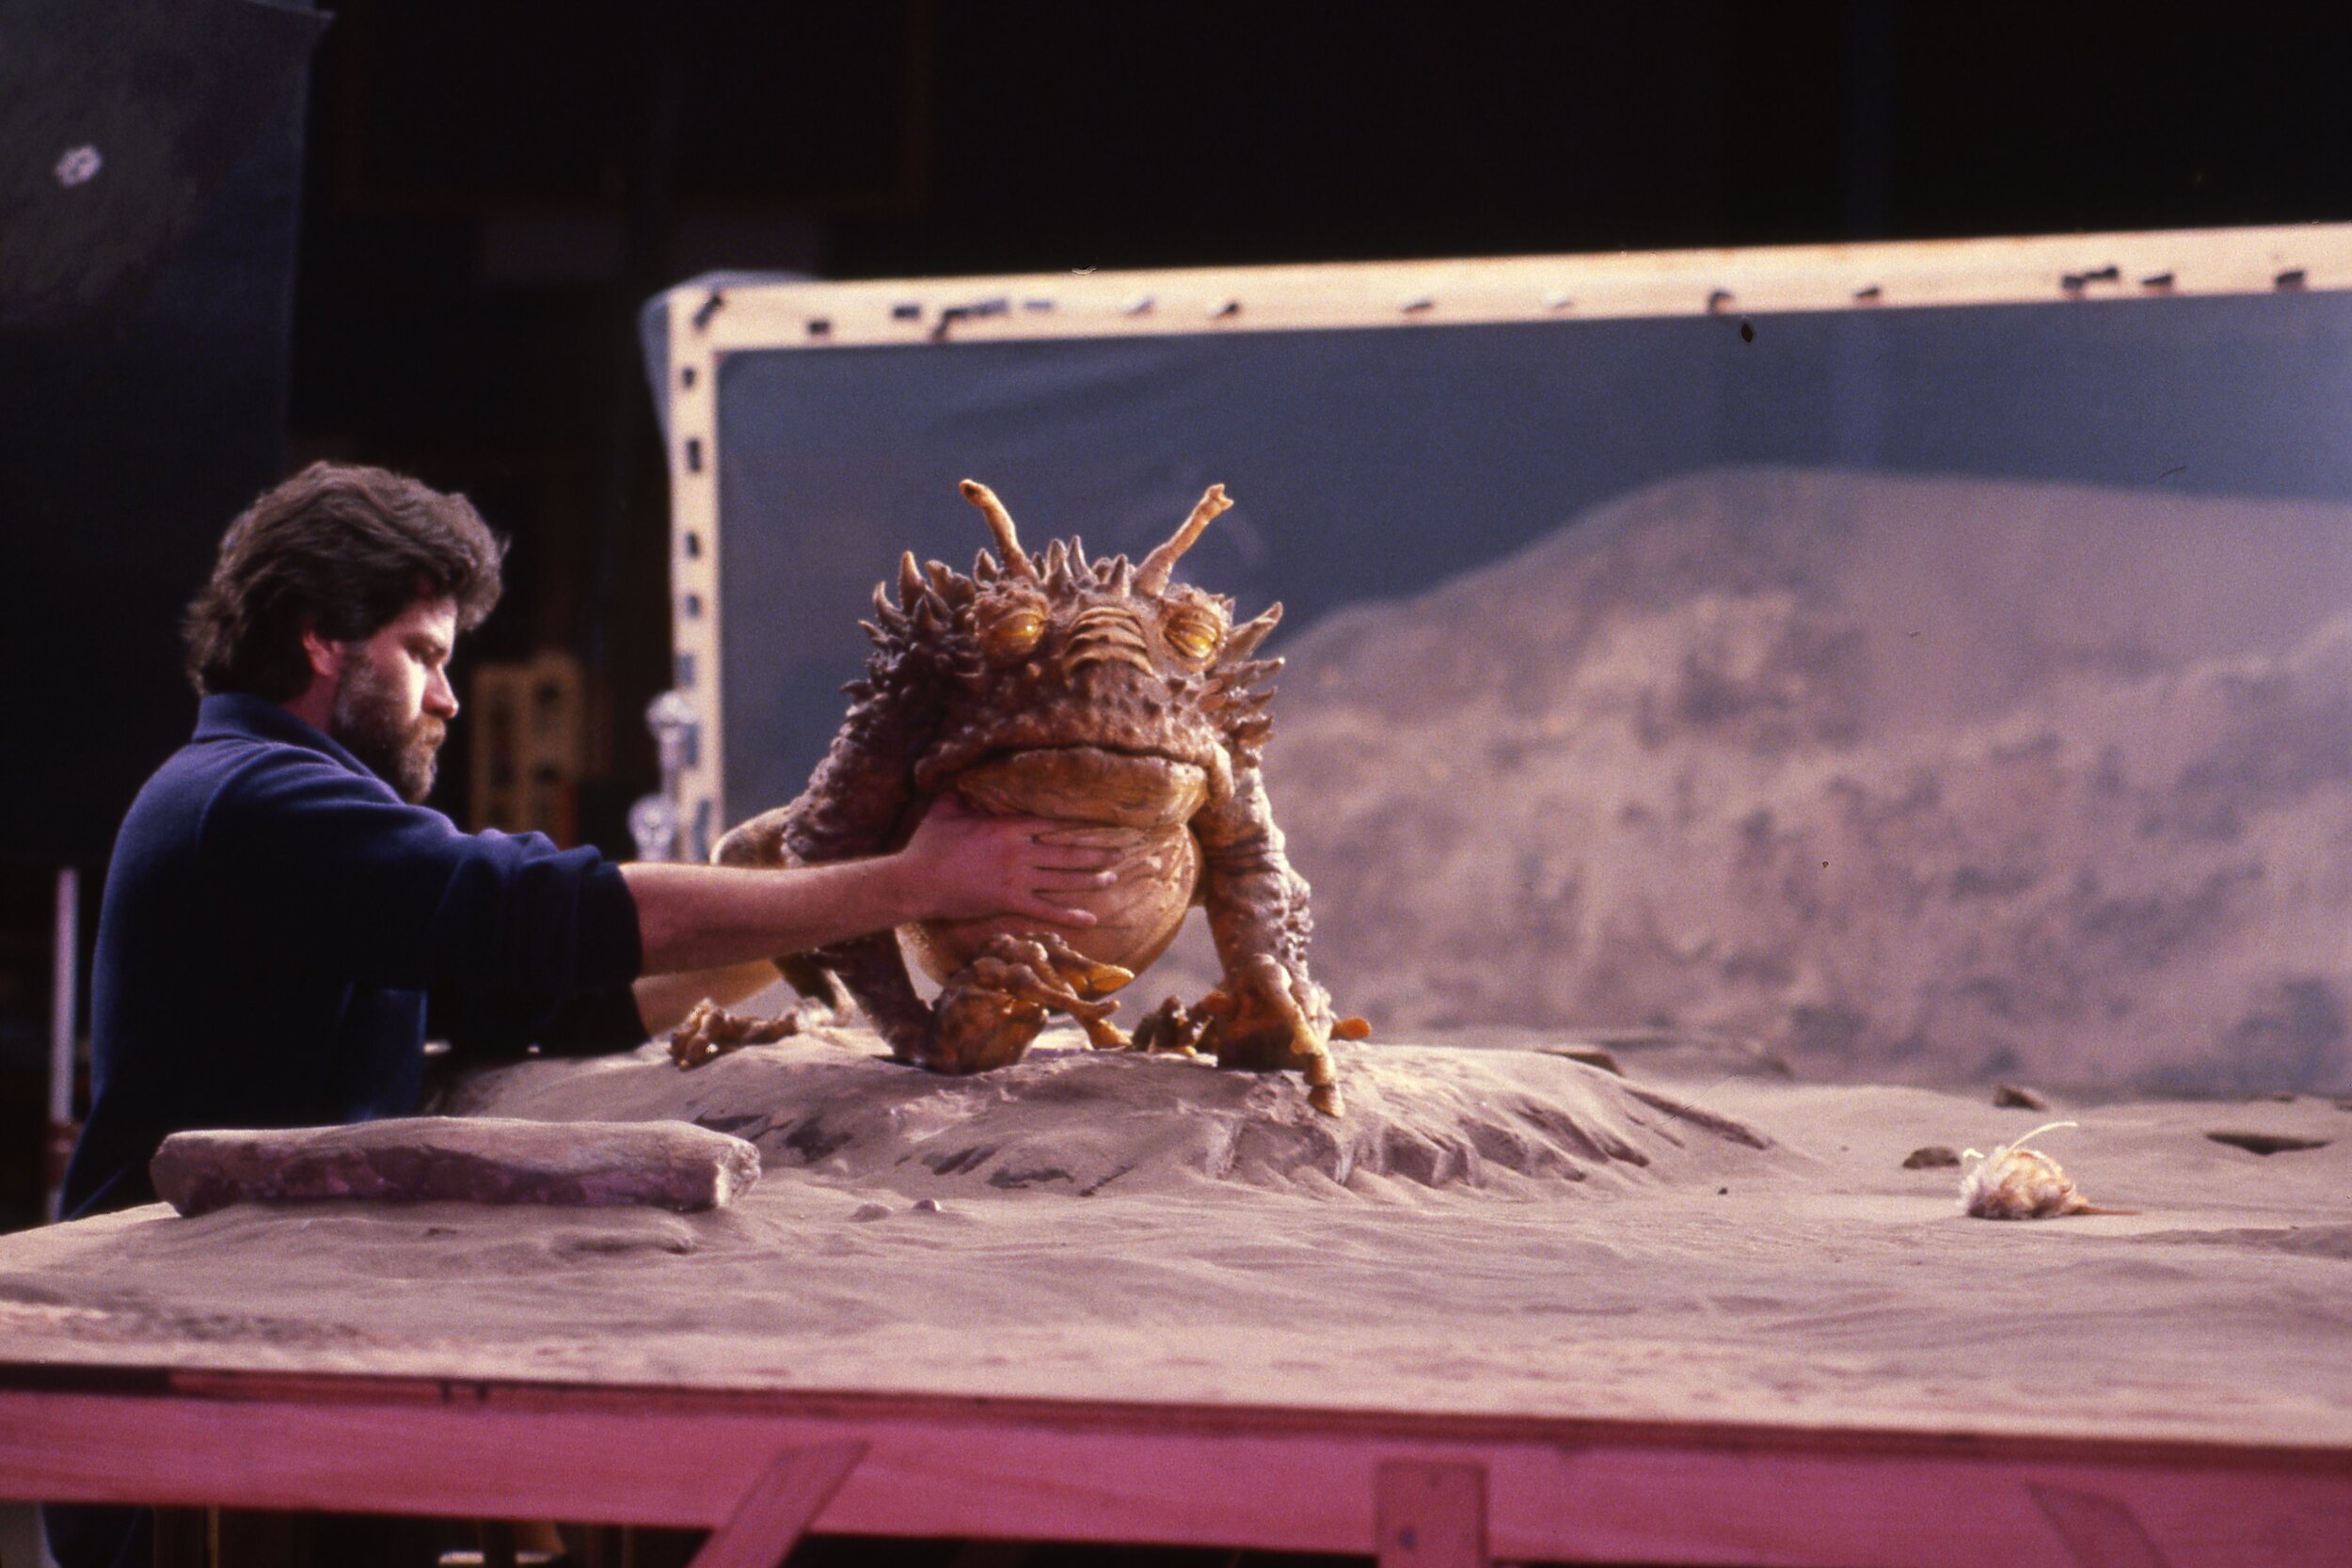  Jeff working on the stage for one of the “gag” shots in Return of the Jedi.  